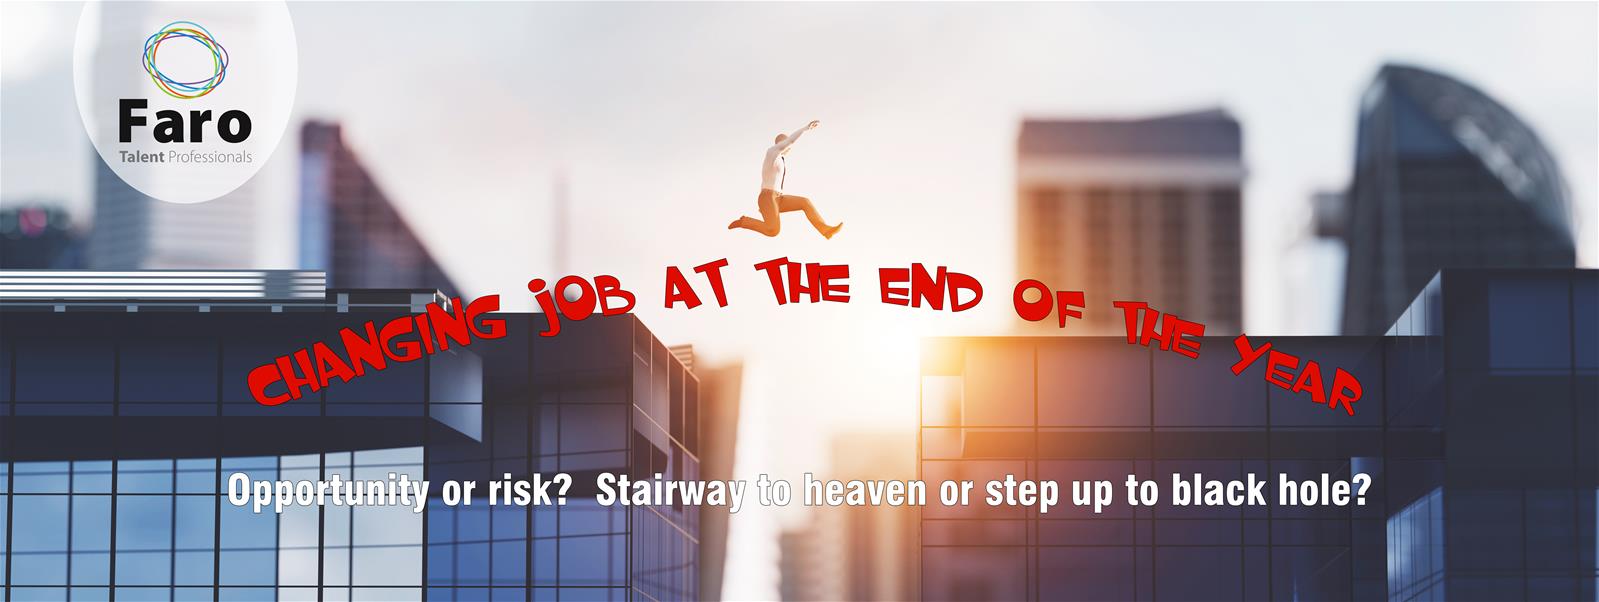 Changing job at the end of the year - Stairway to heaven or step up to black hole?